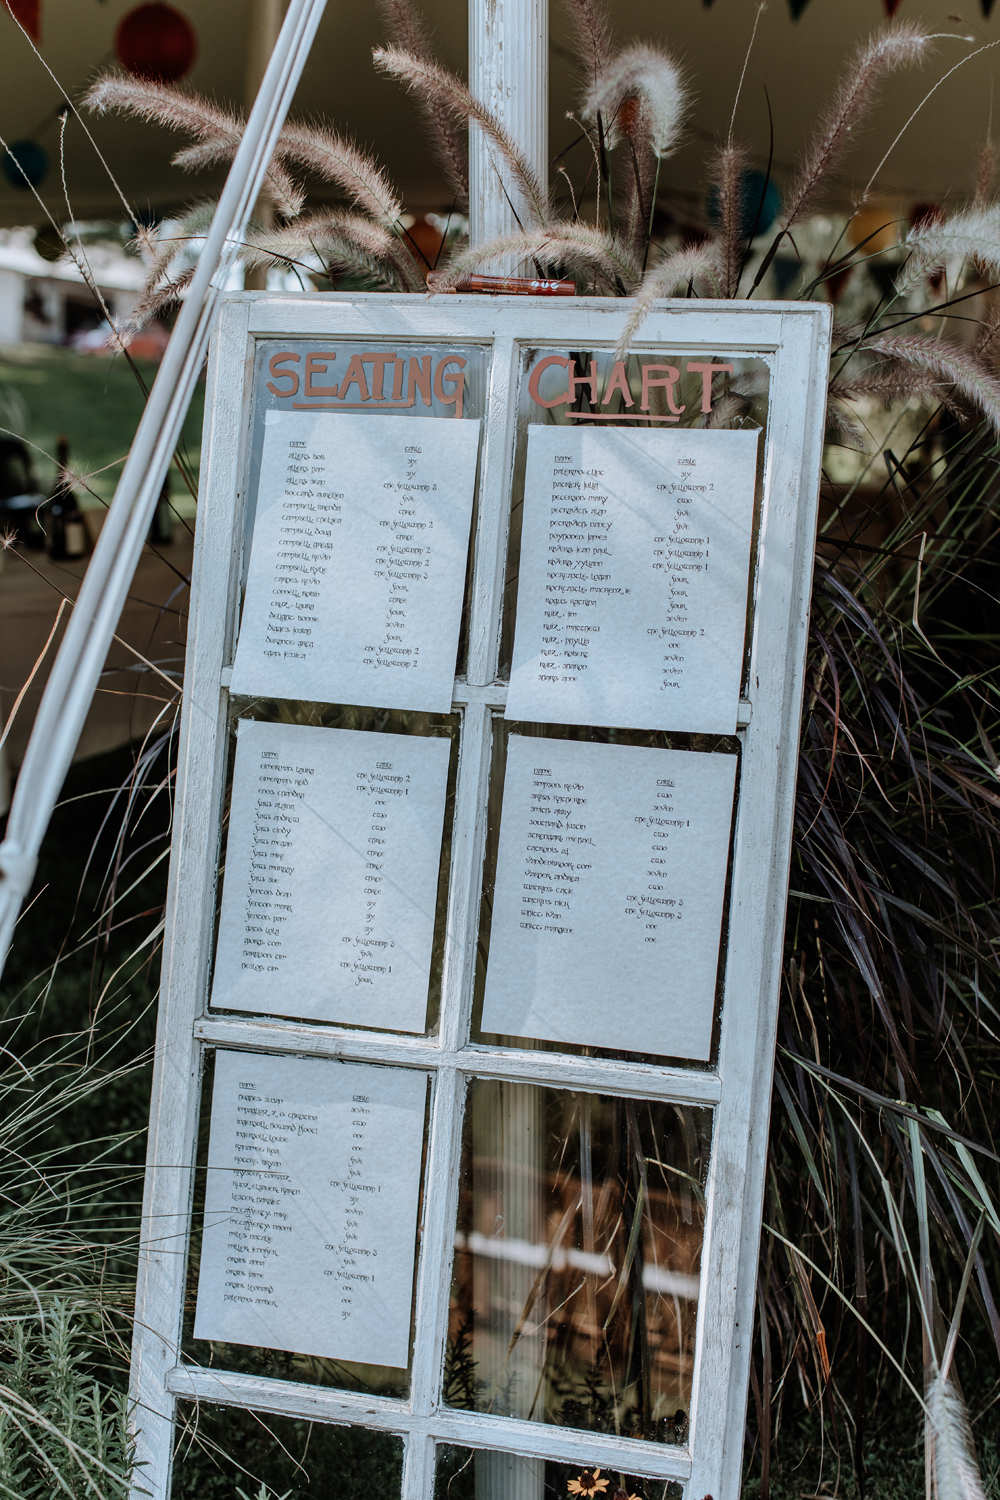 lord-of-the-rings-themed-wedding-pine-grove-pa